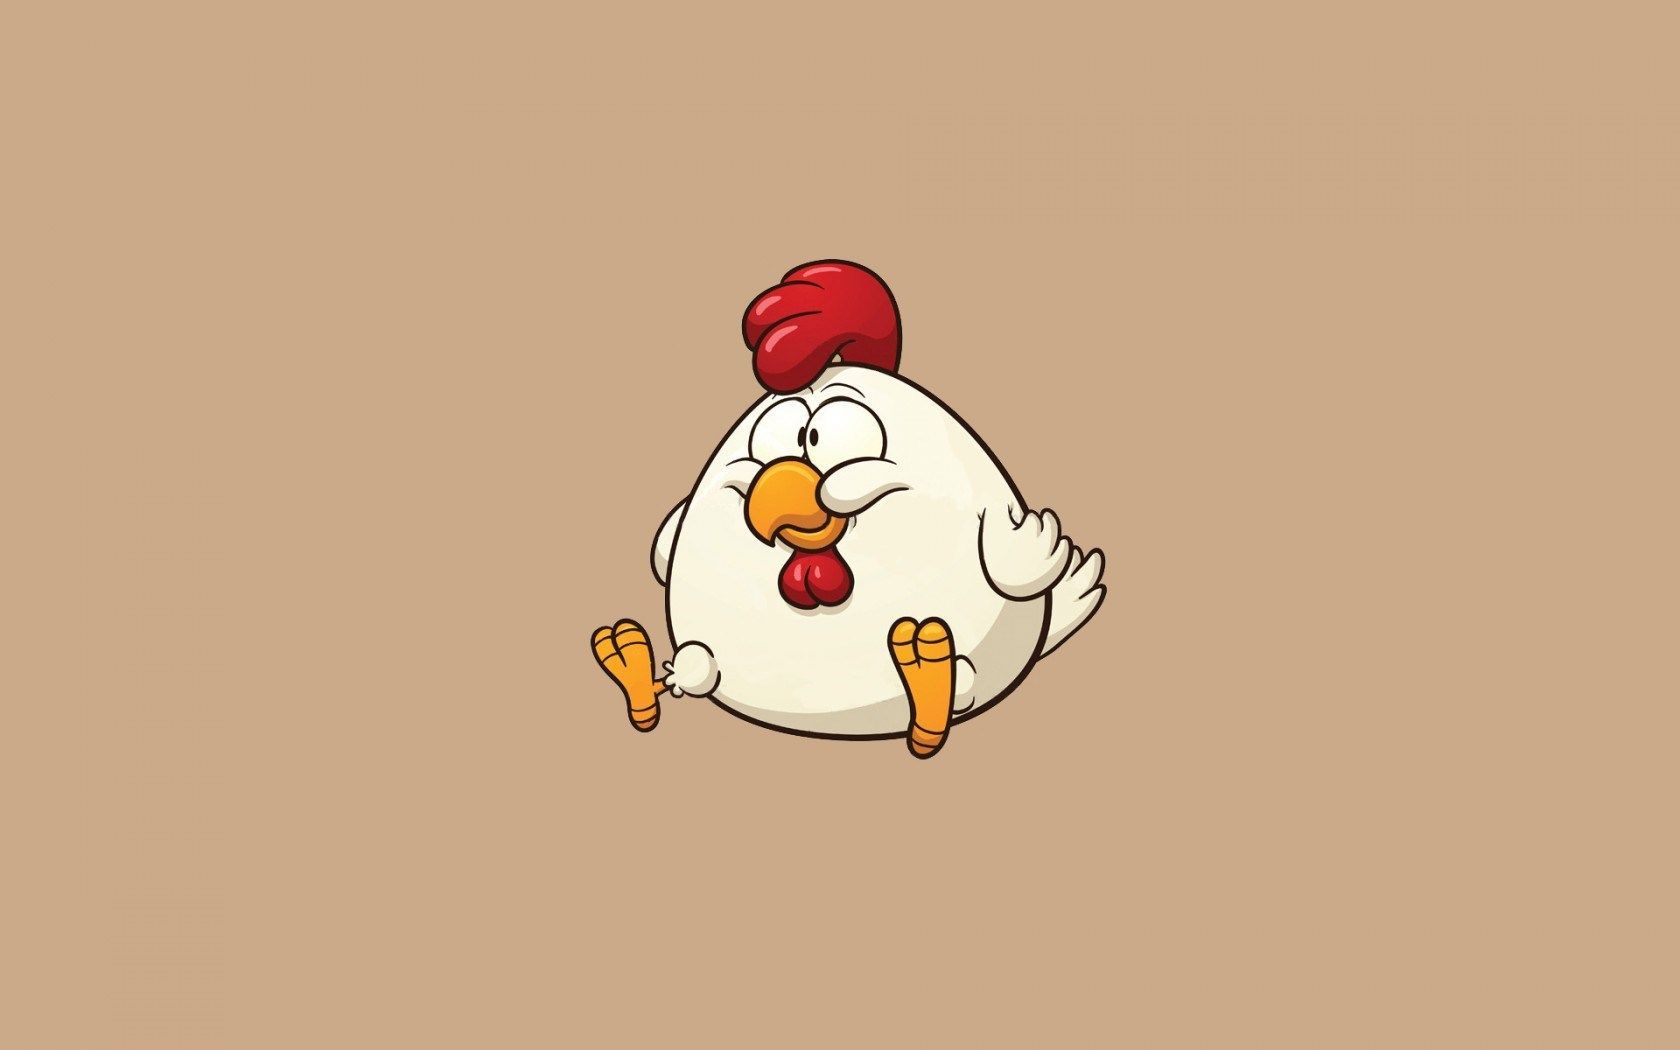 Best 100 Chicken Pictures  Download Free Images  Stock Photos on Unsplash